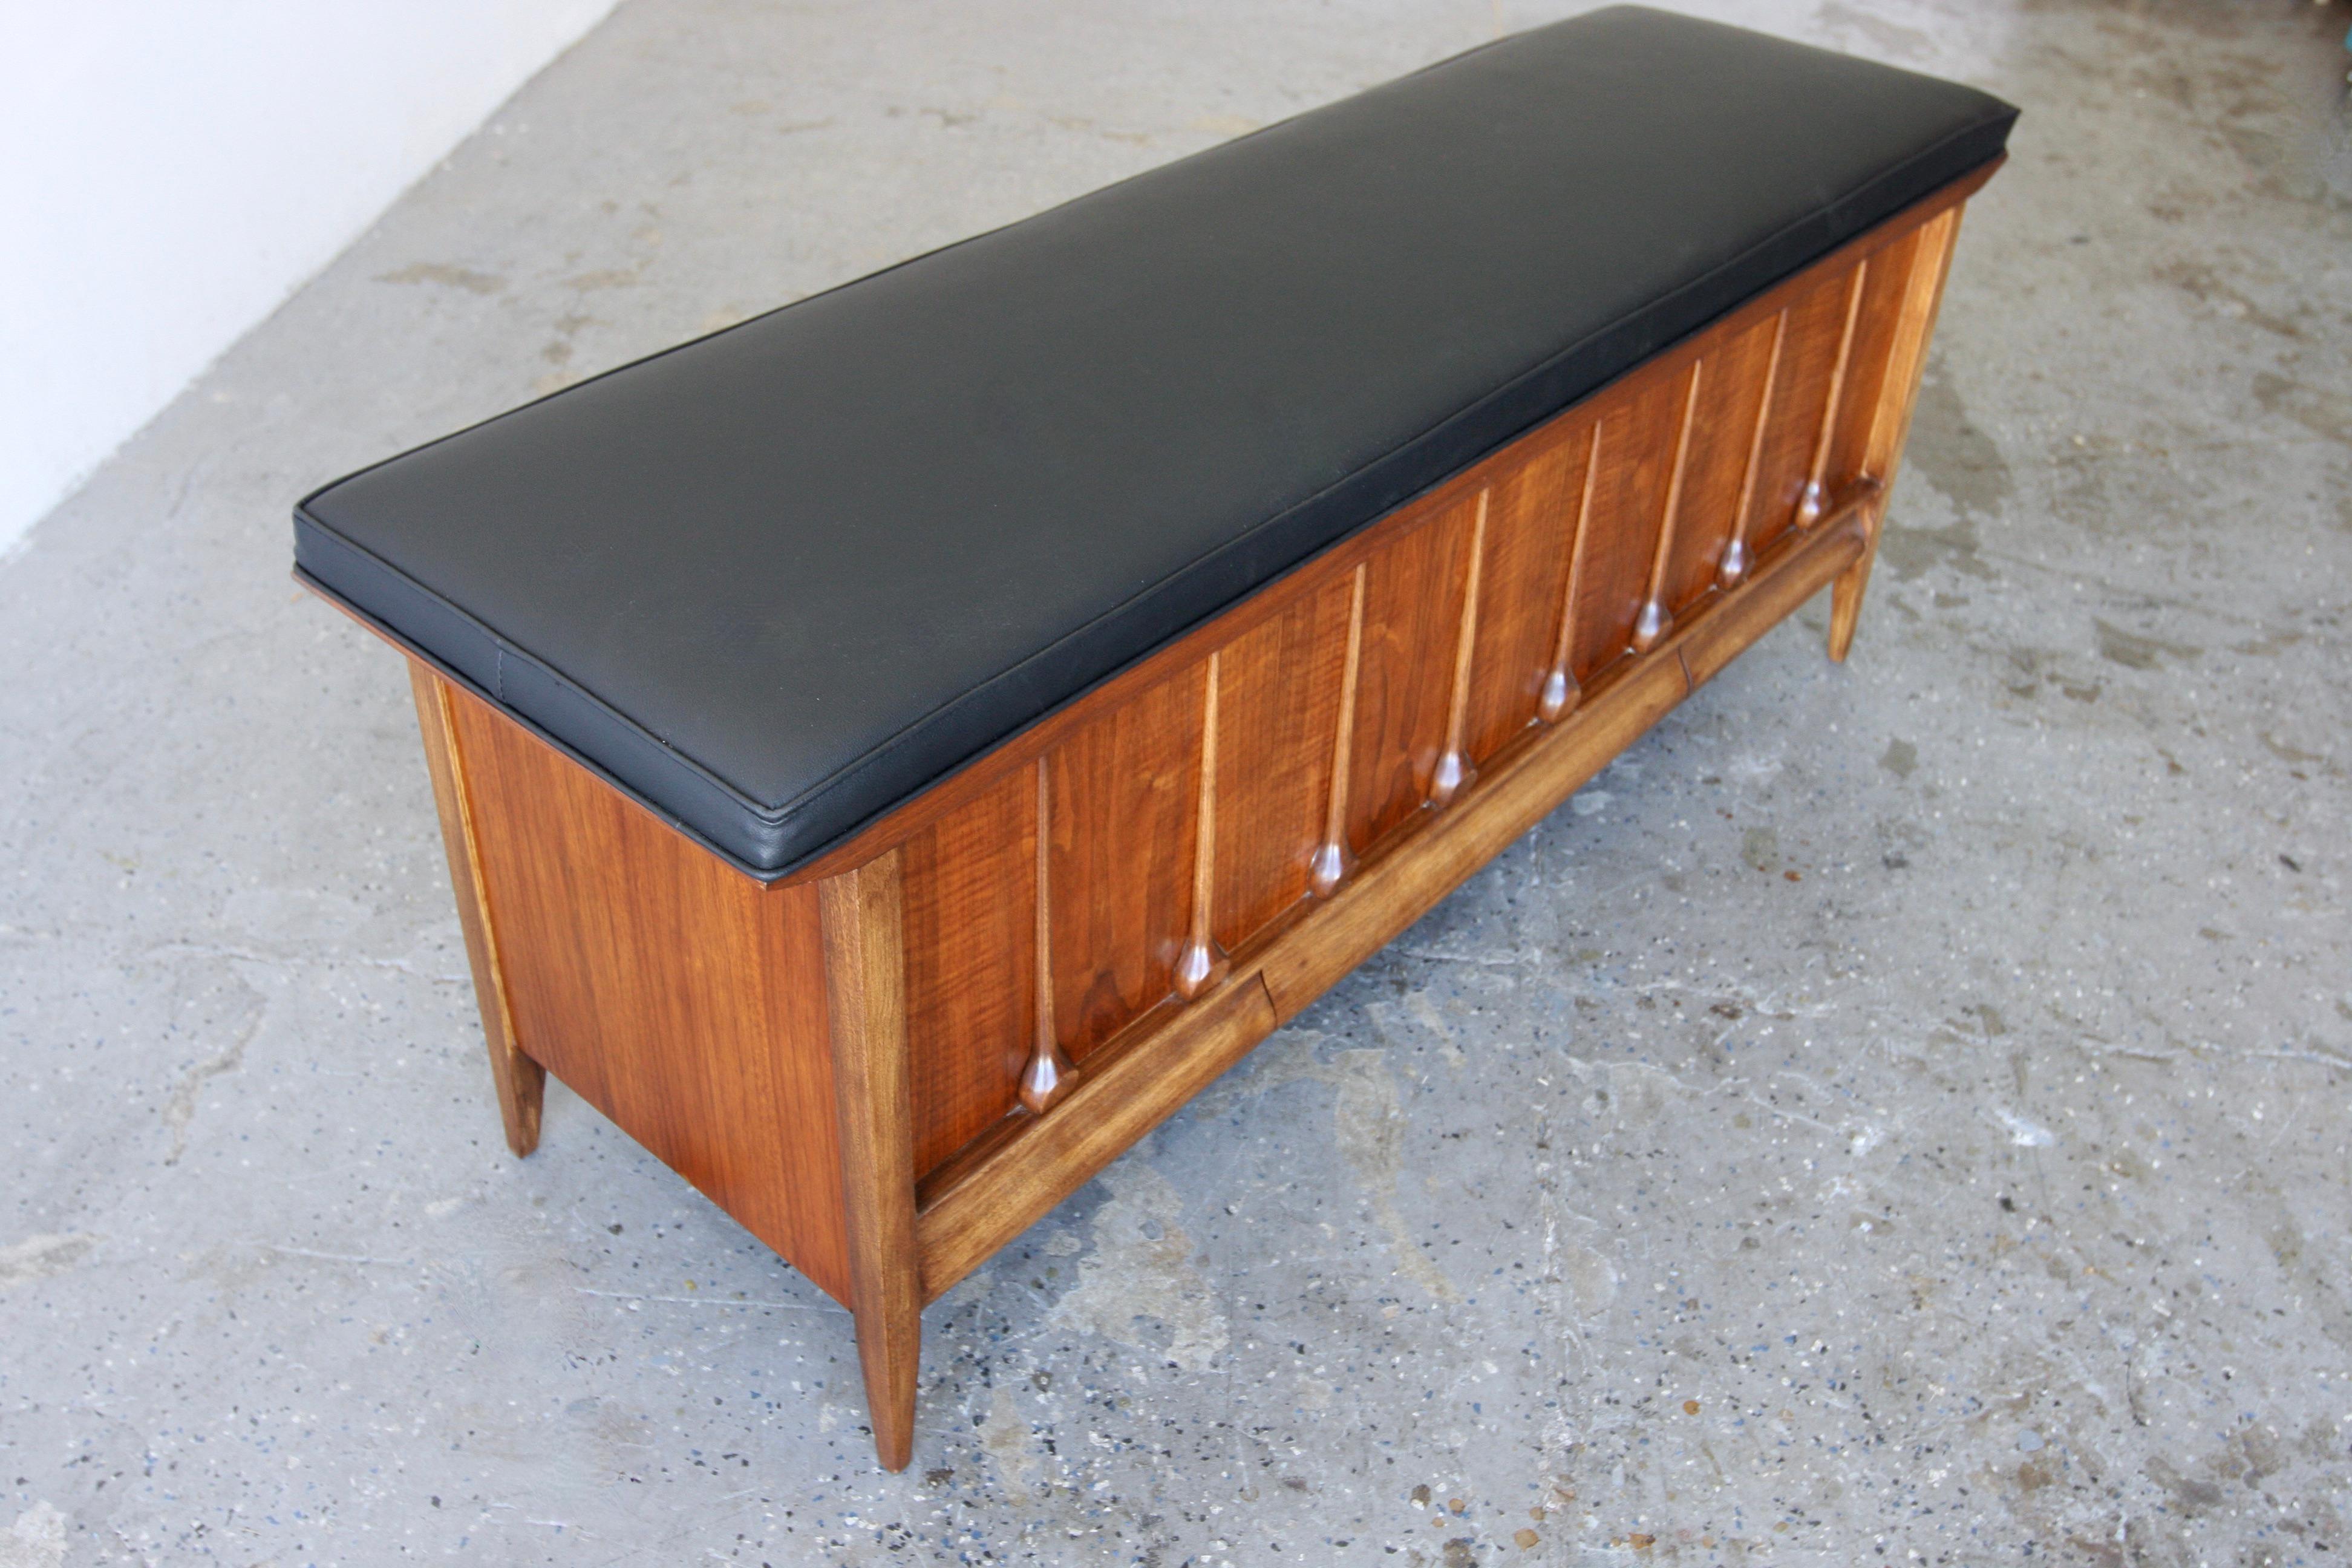 Offered is a  Beautiful and unique Mid-Century Modern cedar blanket chest and bench by Lane Furniture. It is made of cedar with freshly reupholstered with new cushioning and vegan leather. This versatile piece features a Sculptured teardrop design